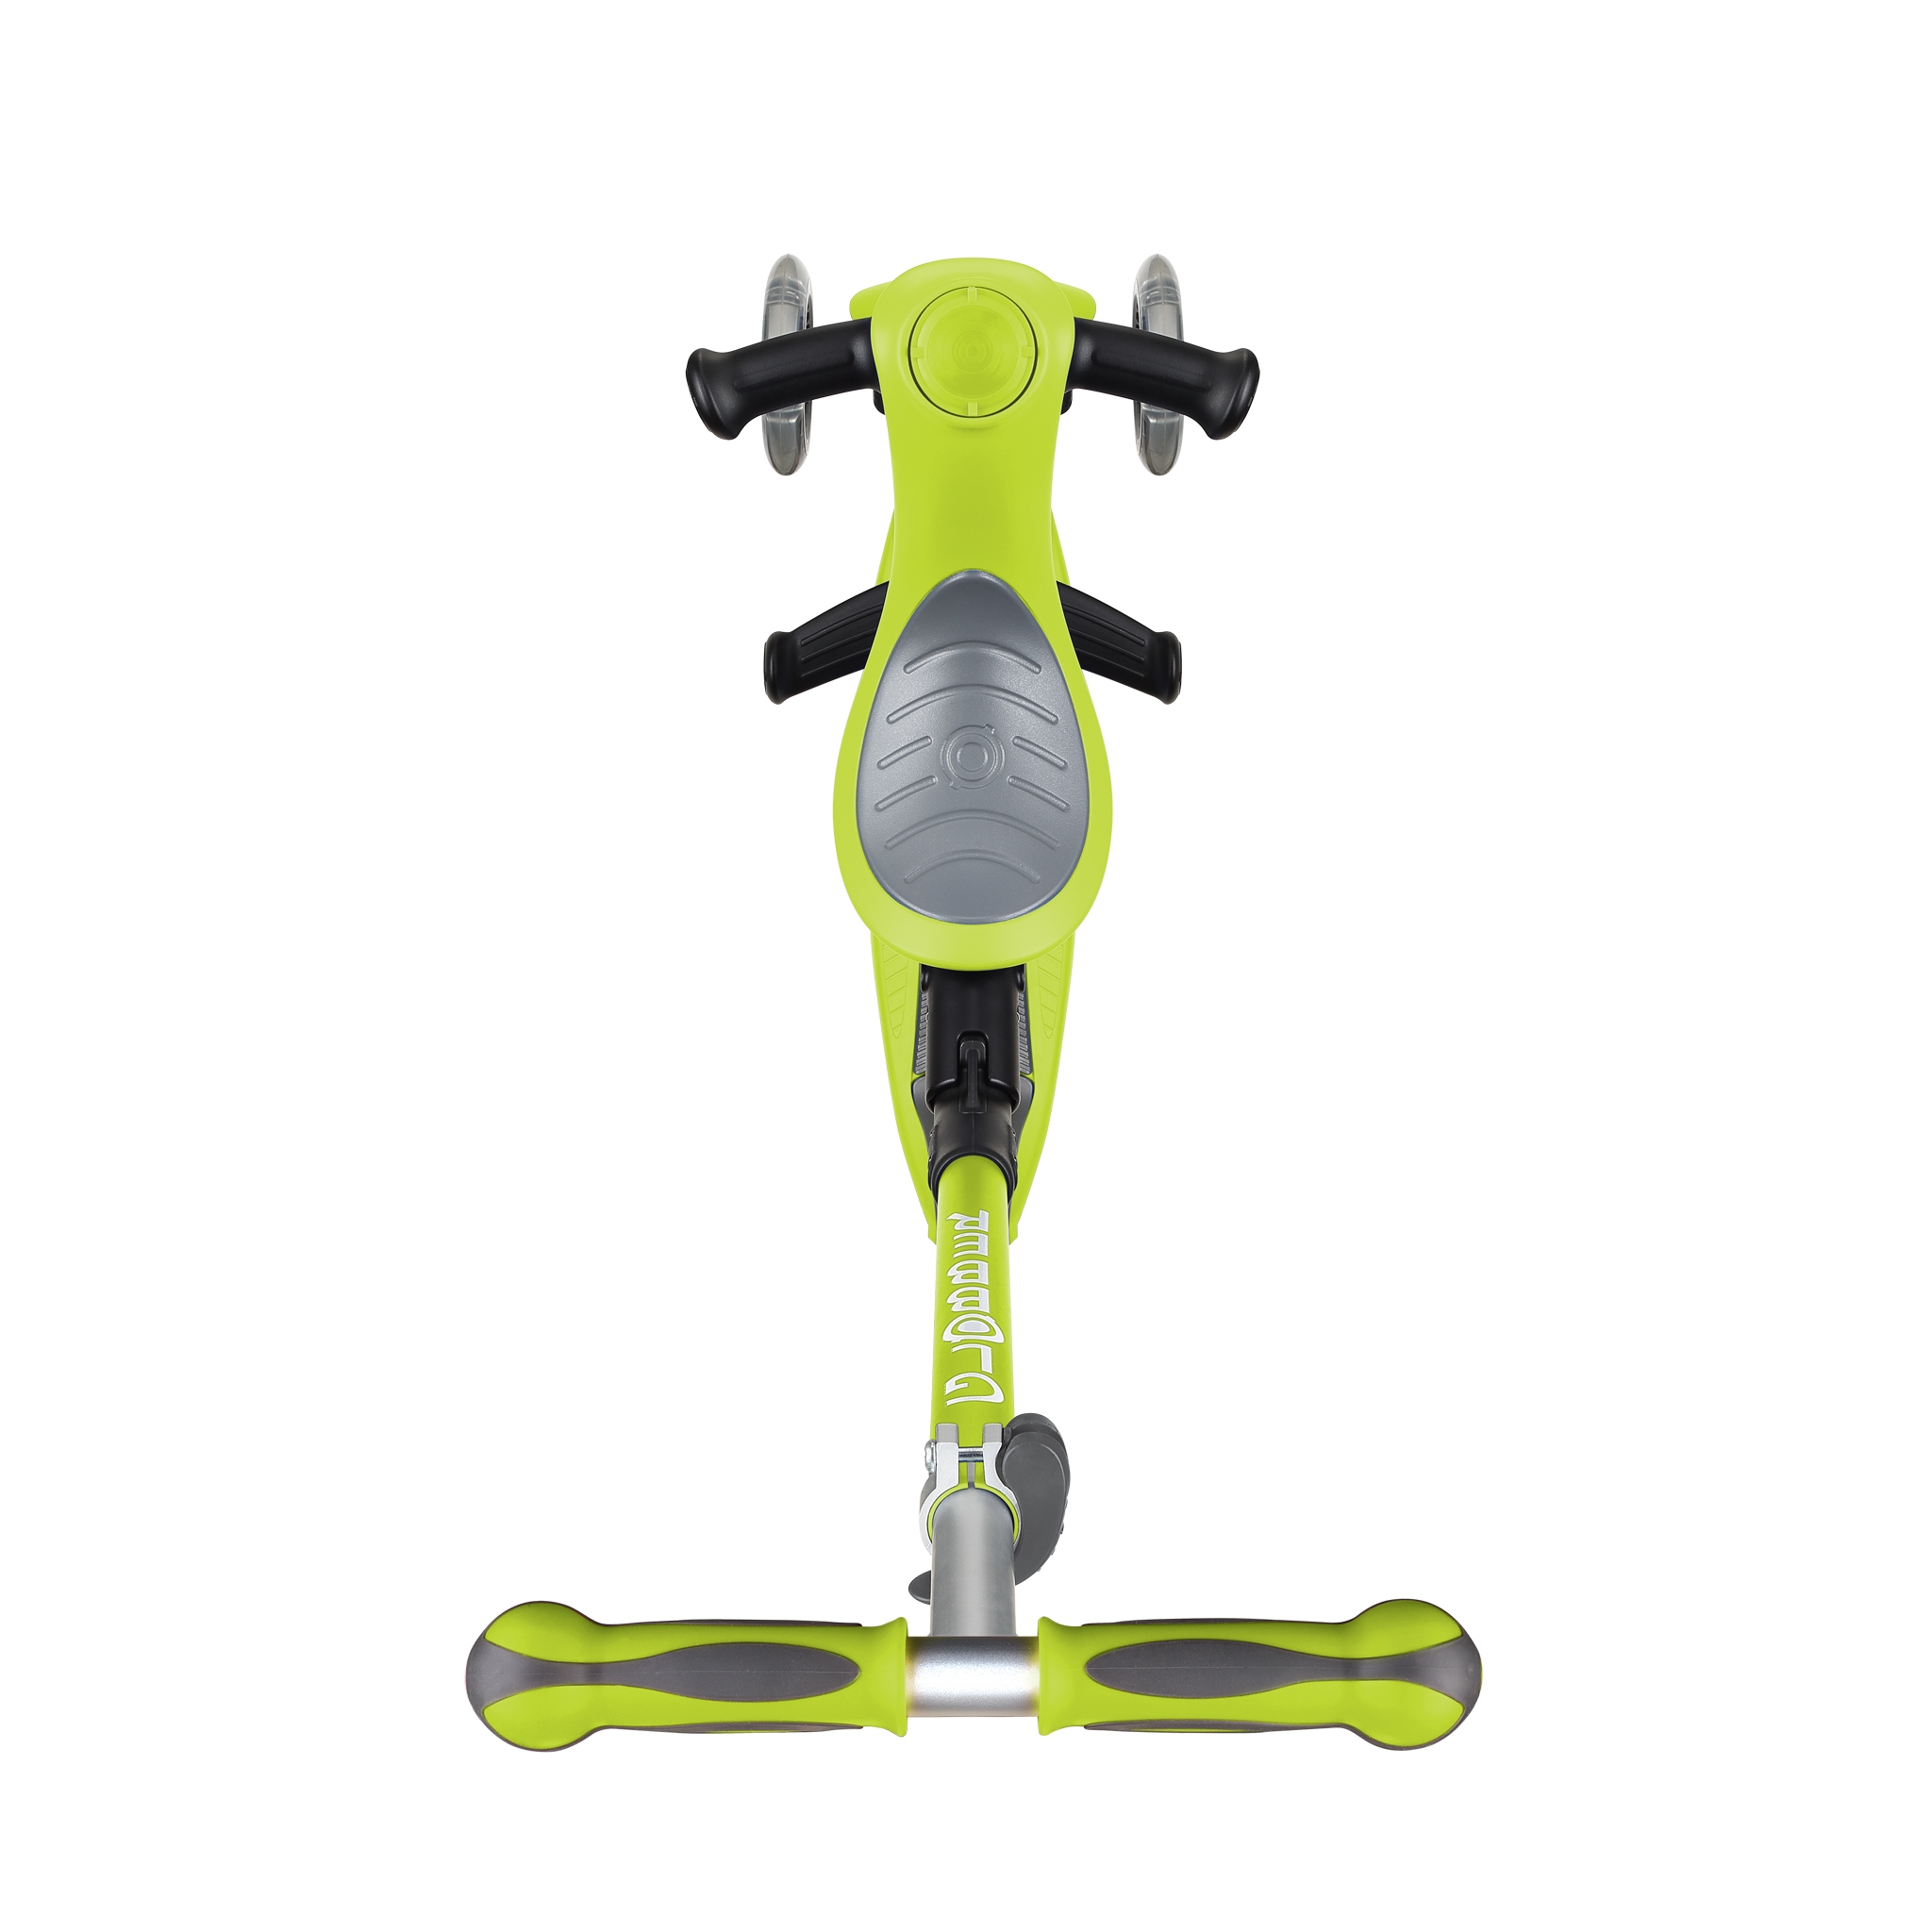 GO-UP-DELUXE-ride-on-walking-bike-scooter-with-extra-wide-3-height-adjustable-seat-lime-green 2